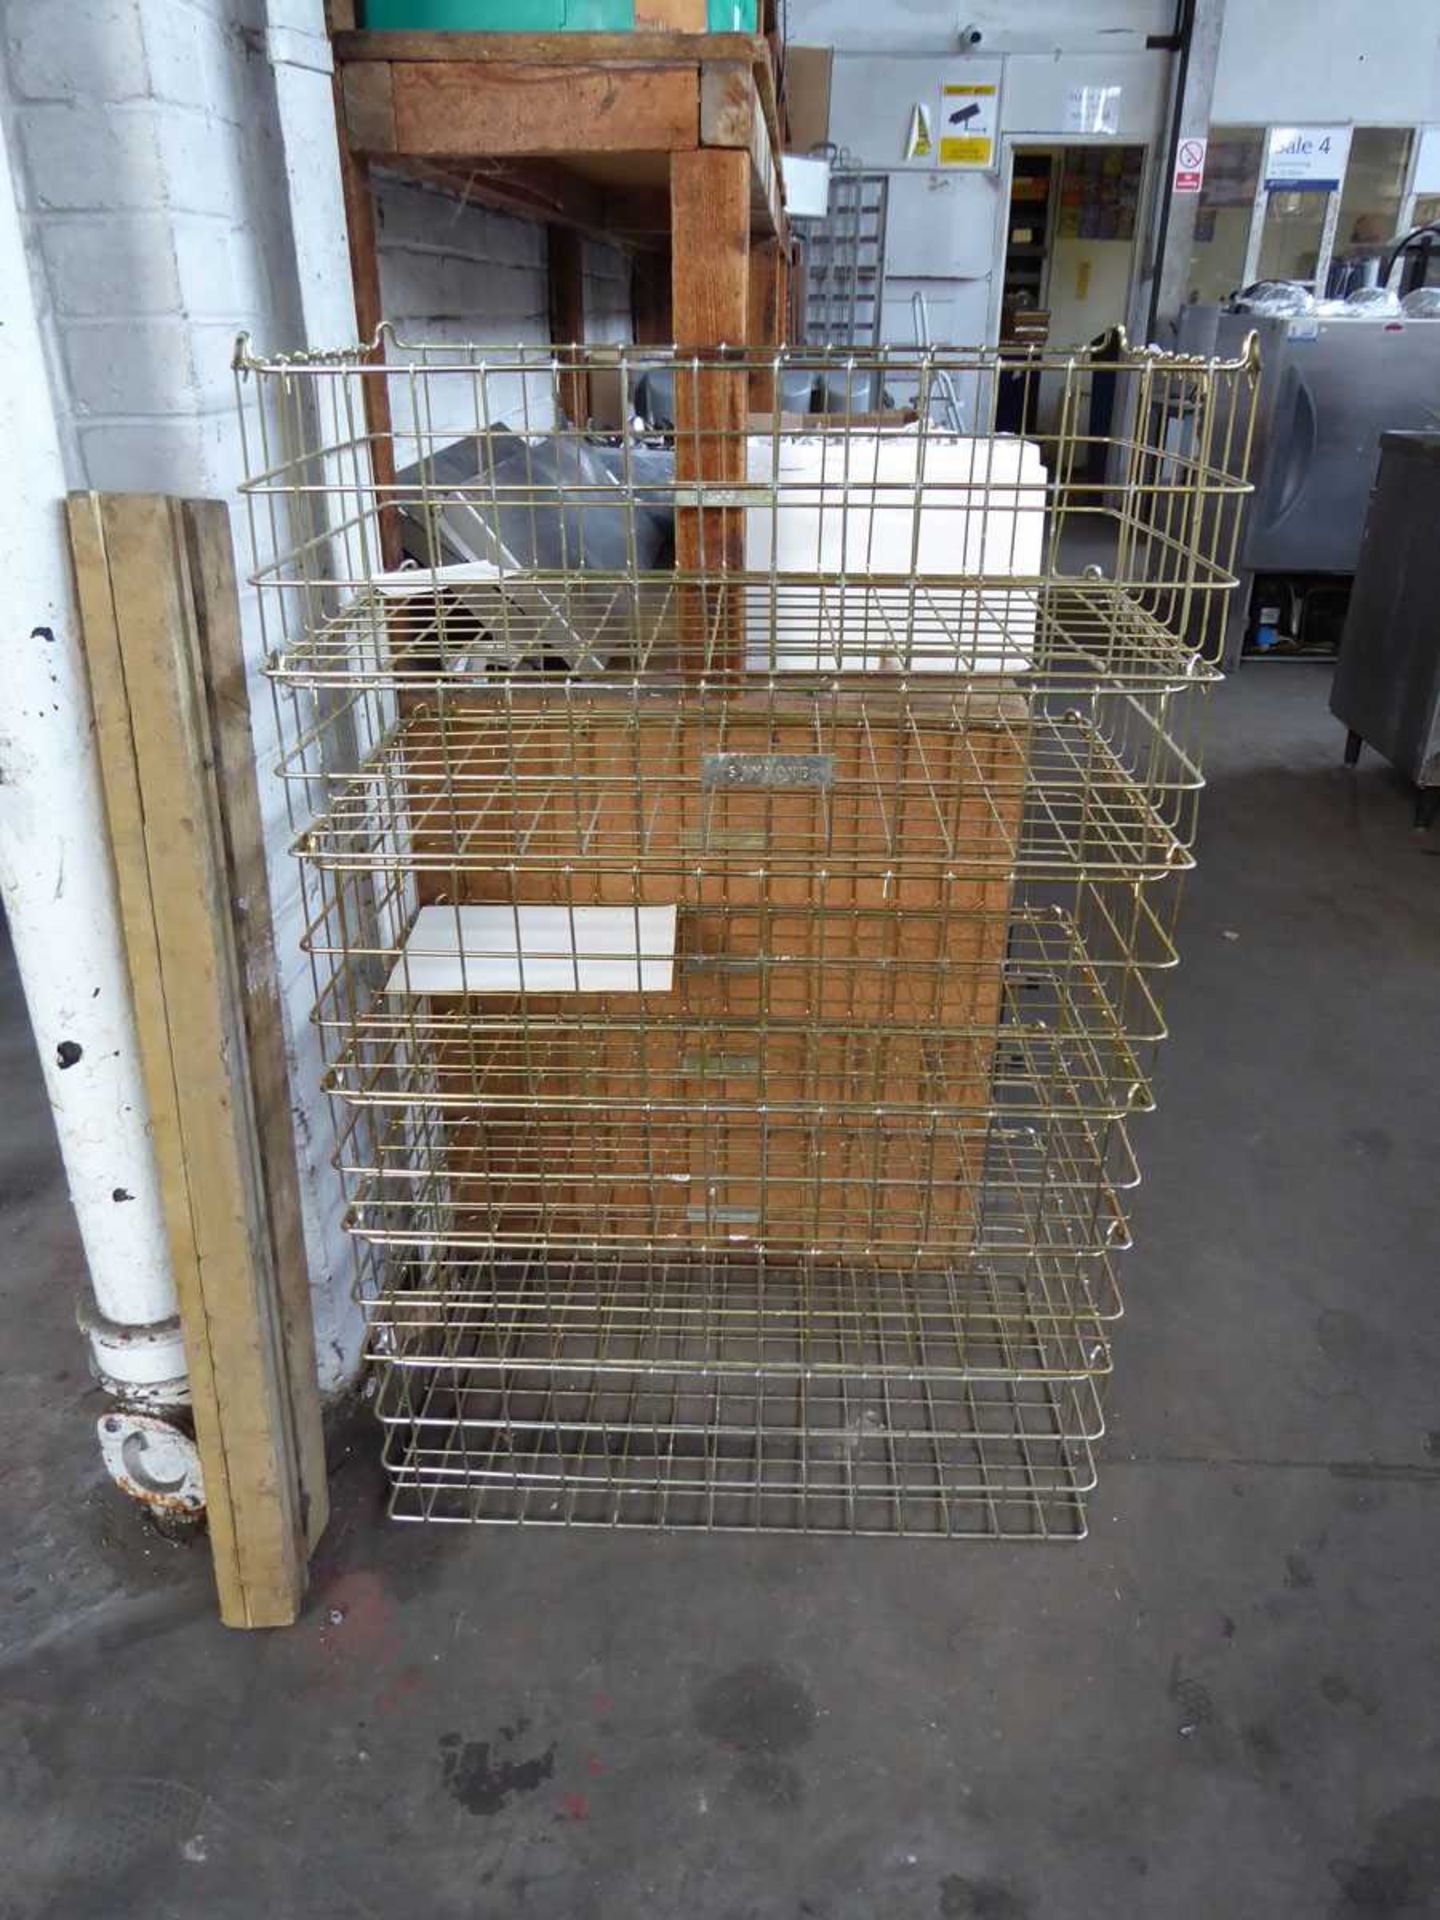 6 bakery-type wire stacking crates